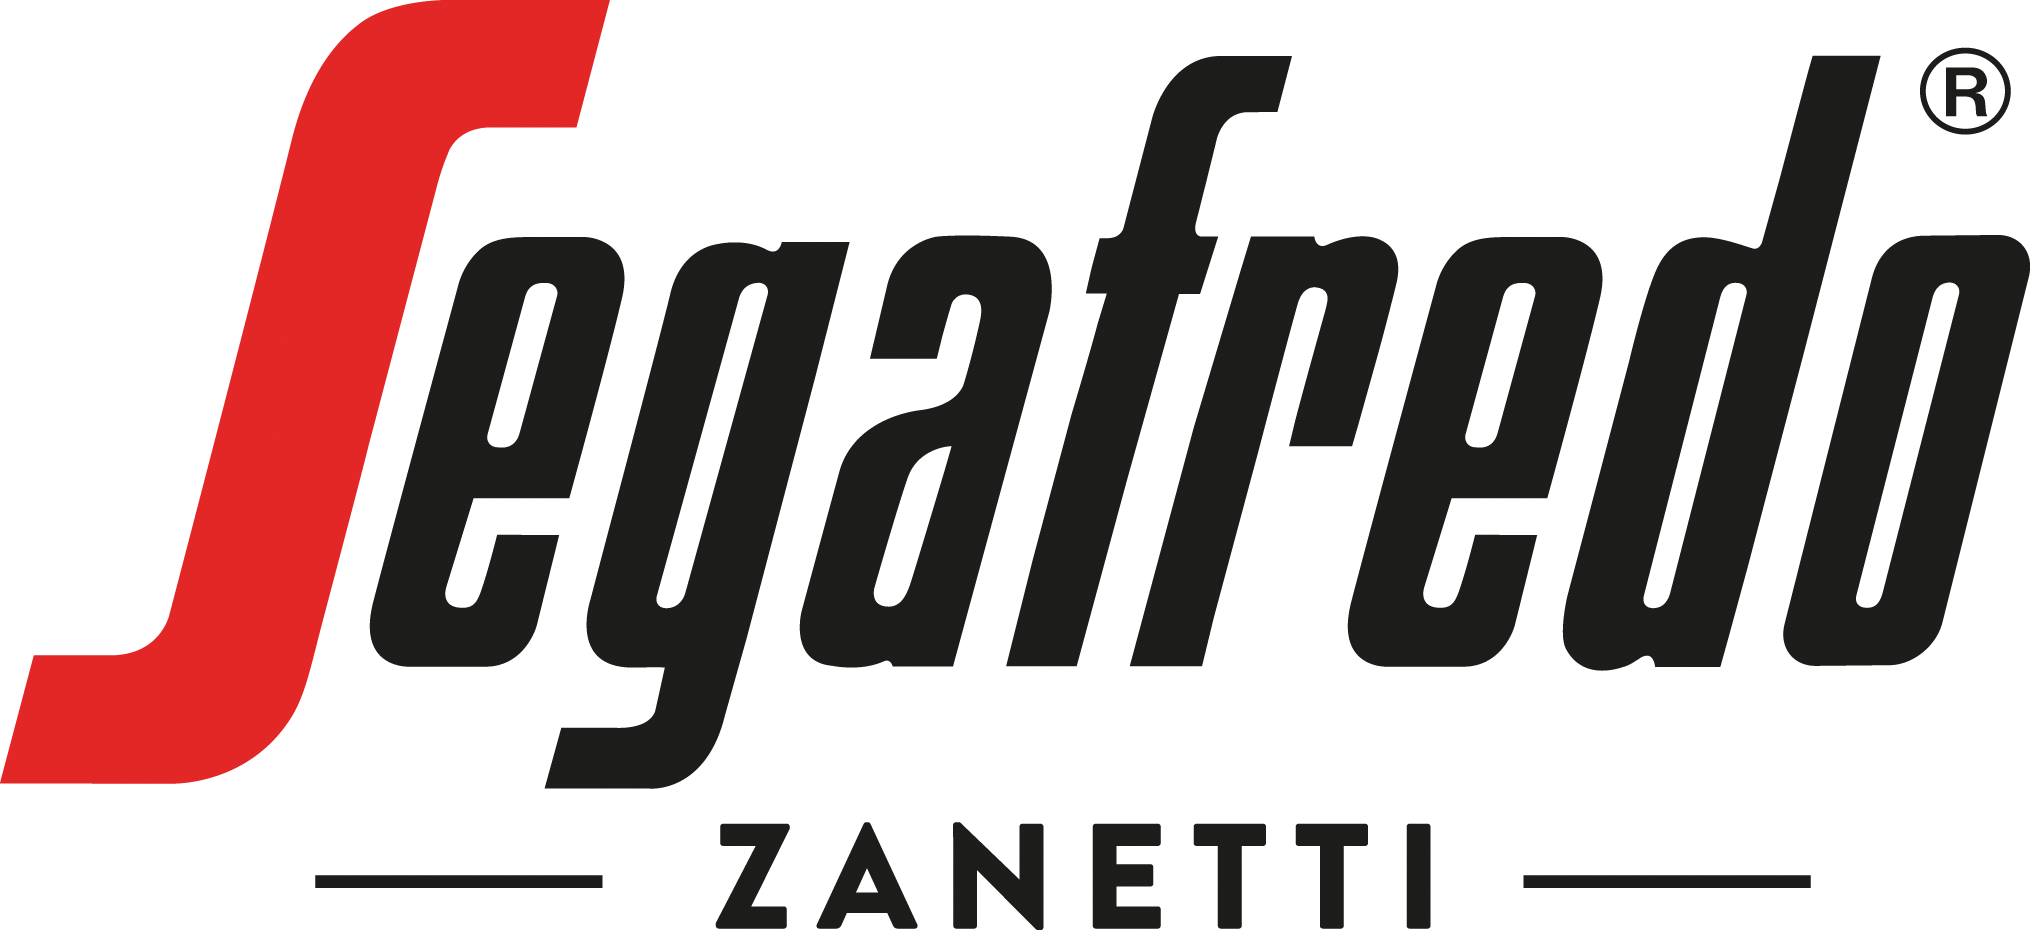 Logo of segafredo zanetti, featuring stylized red and black text on a white background.